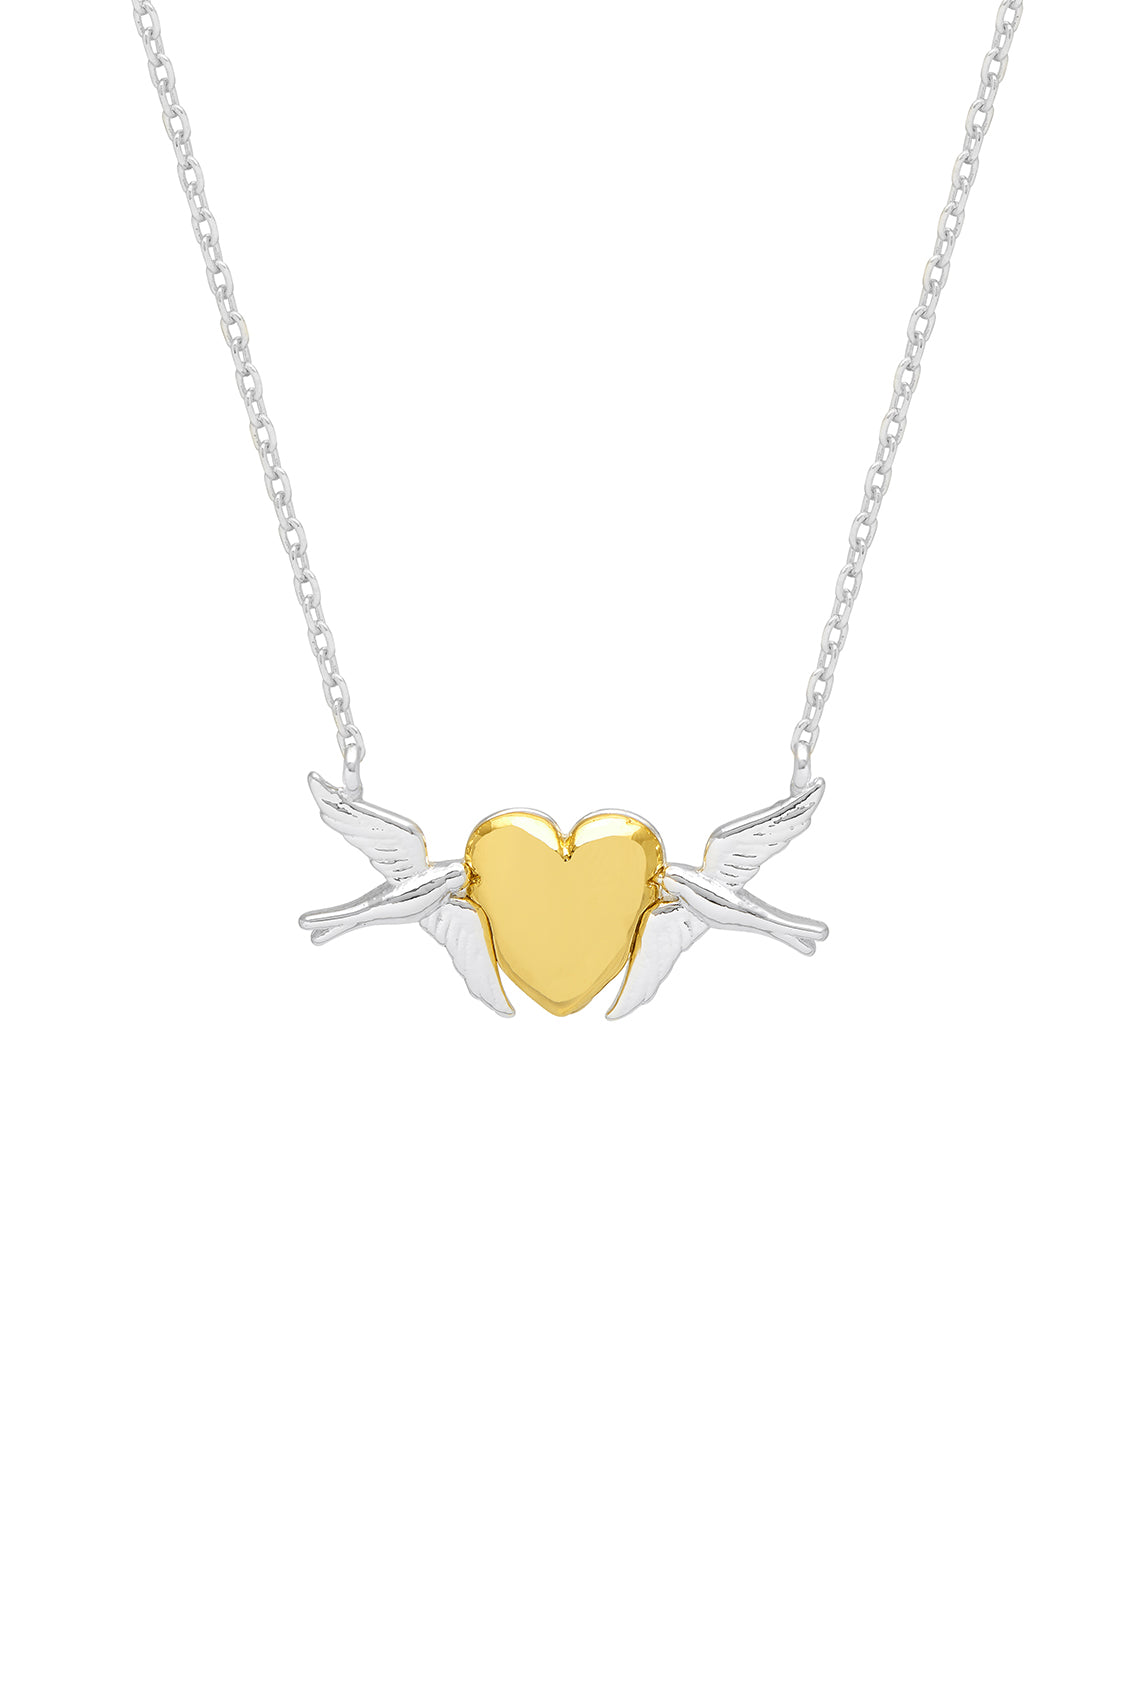 Birds and Heart Necklace